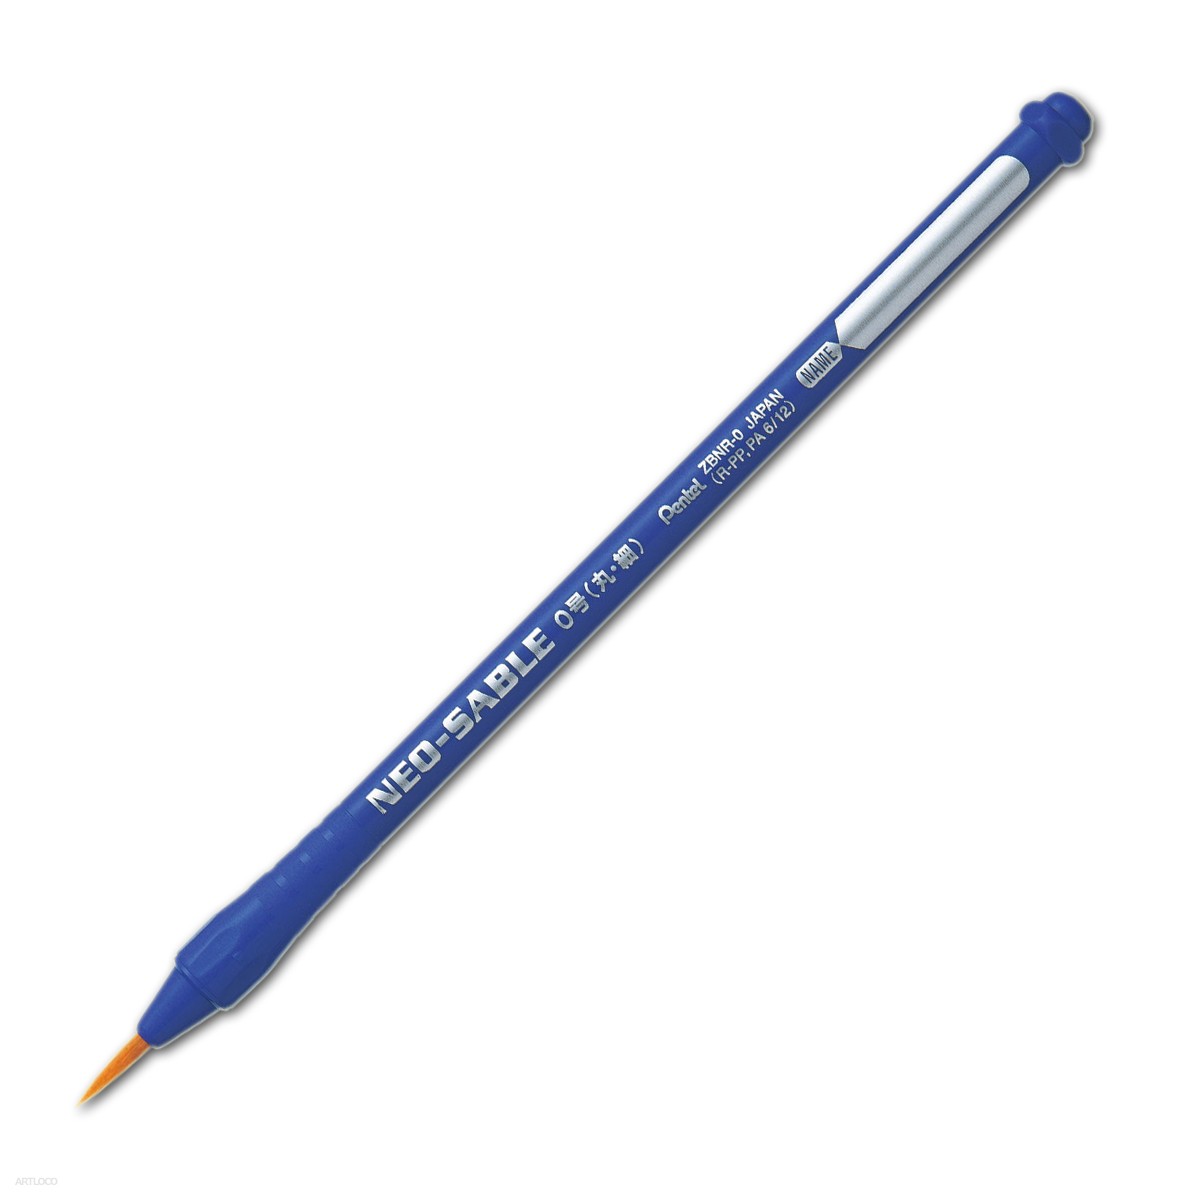 [ mail service possible ] Pentel ... paintbrush Neo sable circle writing brush 0 number ZBNR-0 Pentel [ watercolor writing brush picture acrylic paint elementary school student ]